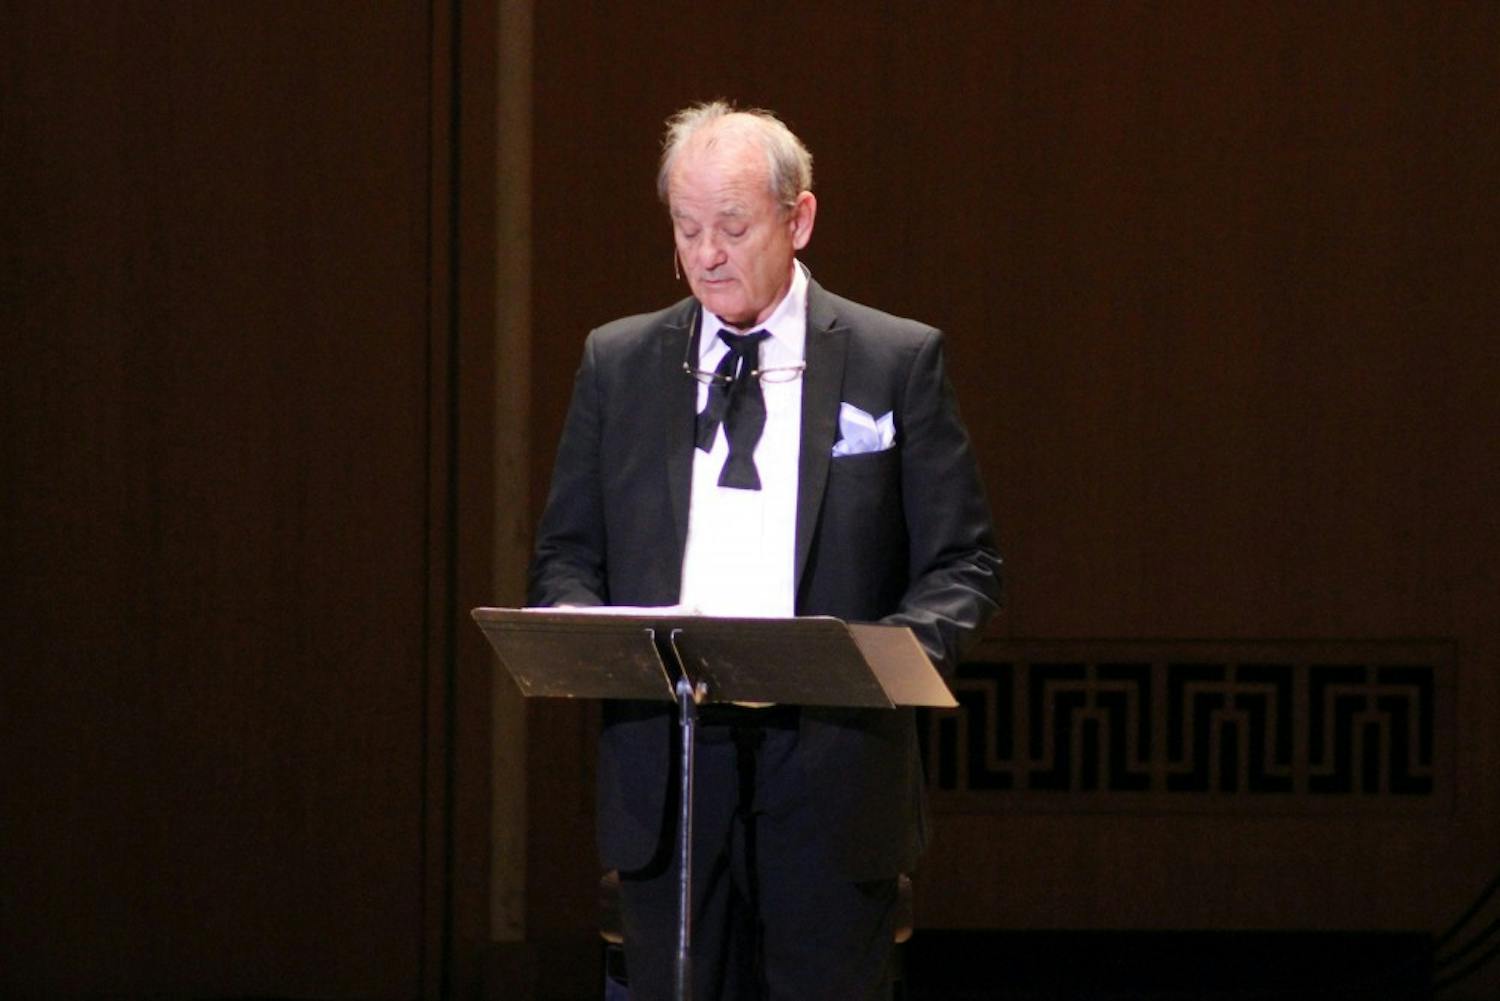 Actor and comedian Bill Murray took to Kleinhans Hall Wednesday night and read and performed&nbsp;classic pieces of American literature in "New Worlds," a literary and music show featuring a cellist and violinist.&nbsp;